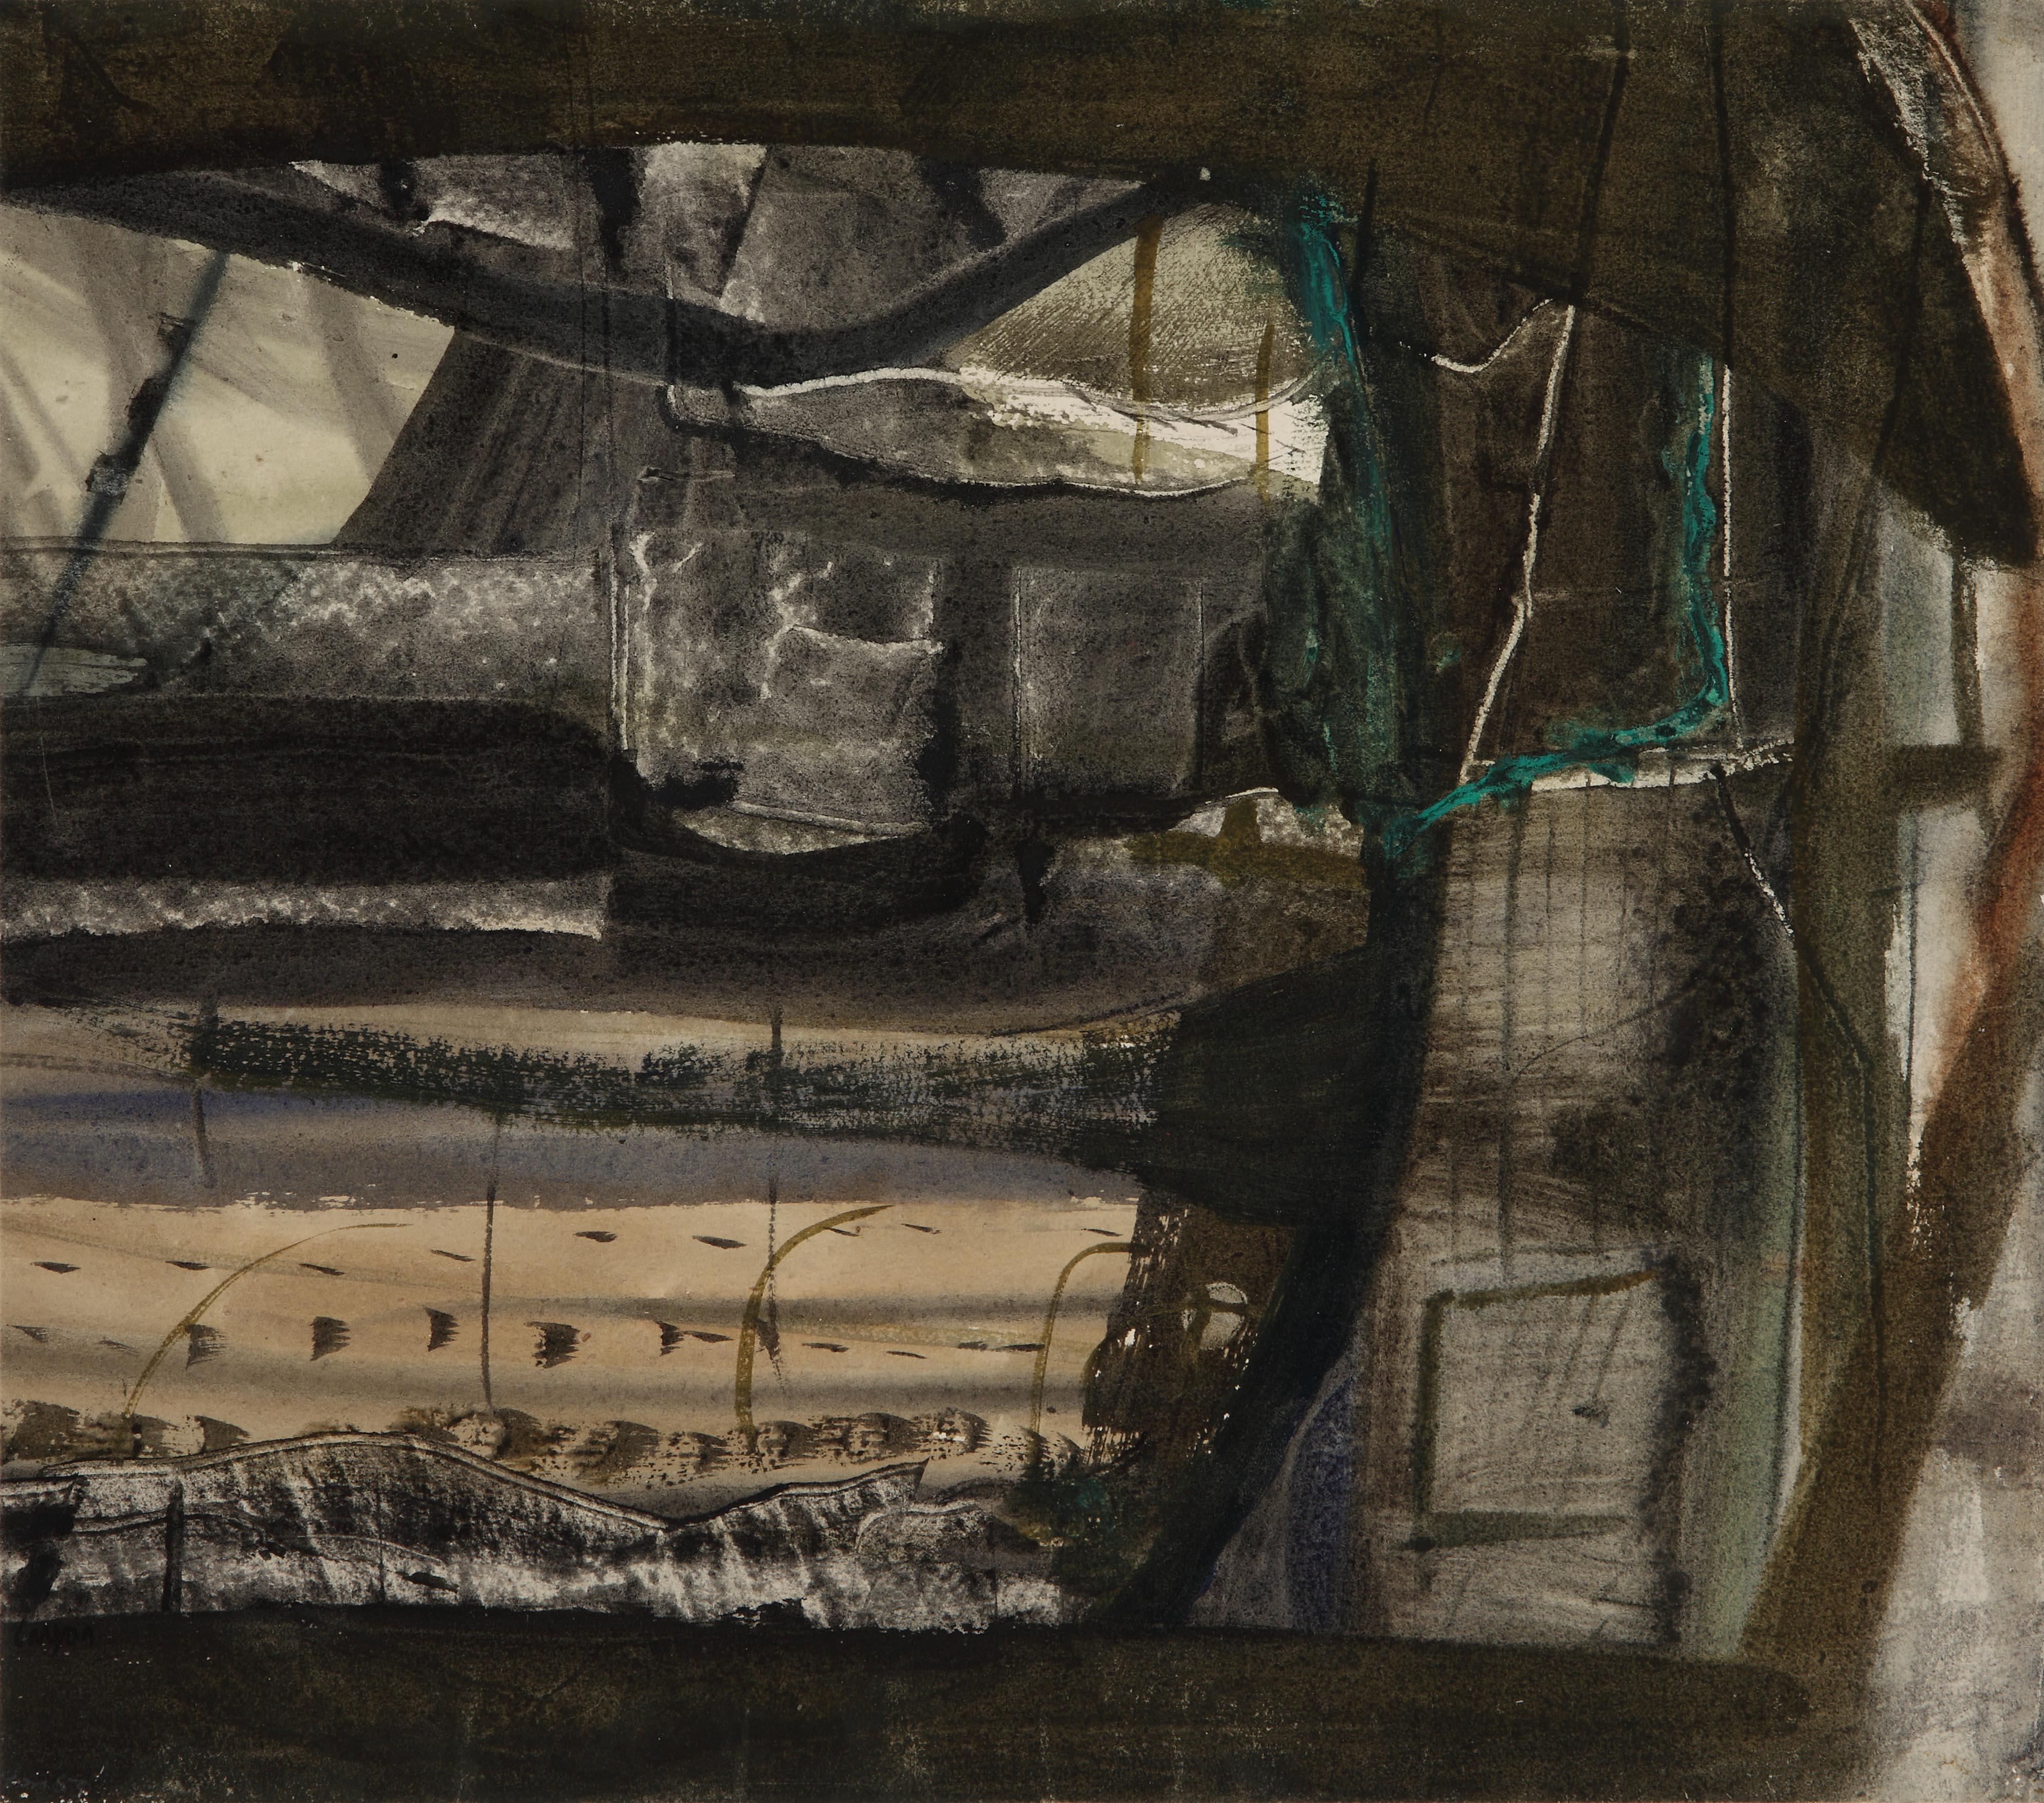 Peter Lanyon, Winter Landscape, Anticoli Corrado, watercolour, gouache, 1950's

Peter Lanyon (British, 1918-1964)
 Winter Landscape, Anticoli Corrado 
 Signed 'Lanyon' and dated 'Jan 53' (lower left), 
 Further signed, Inscribed and dated again